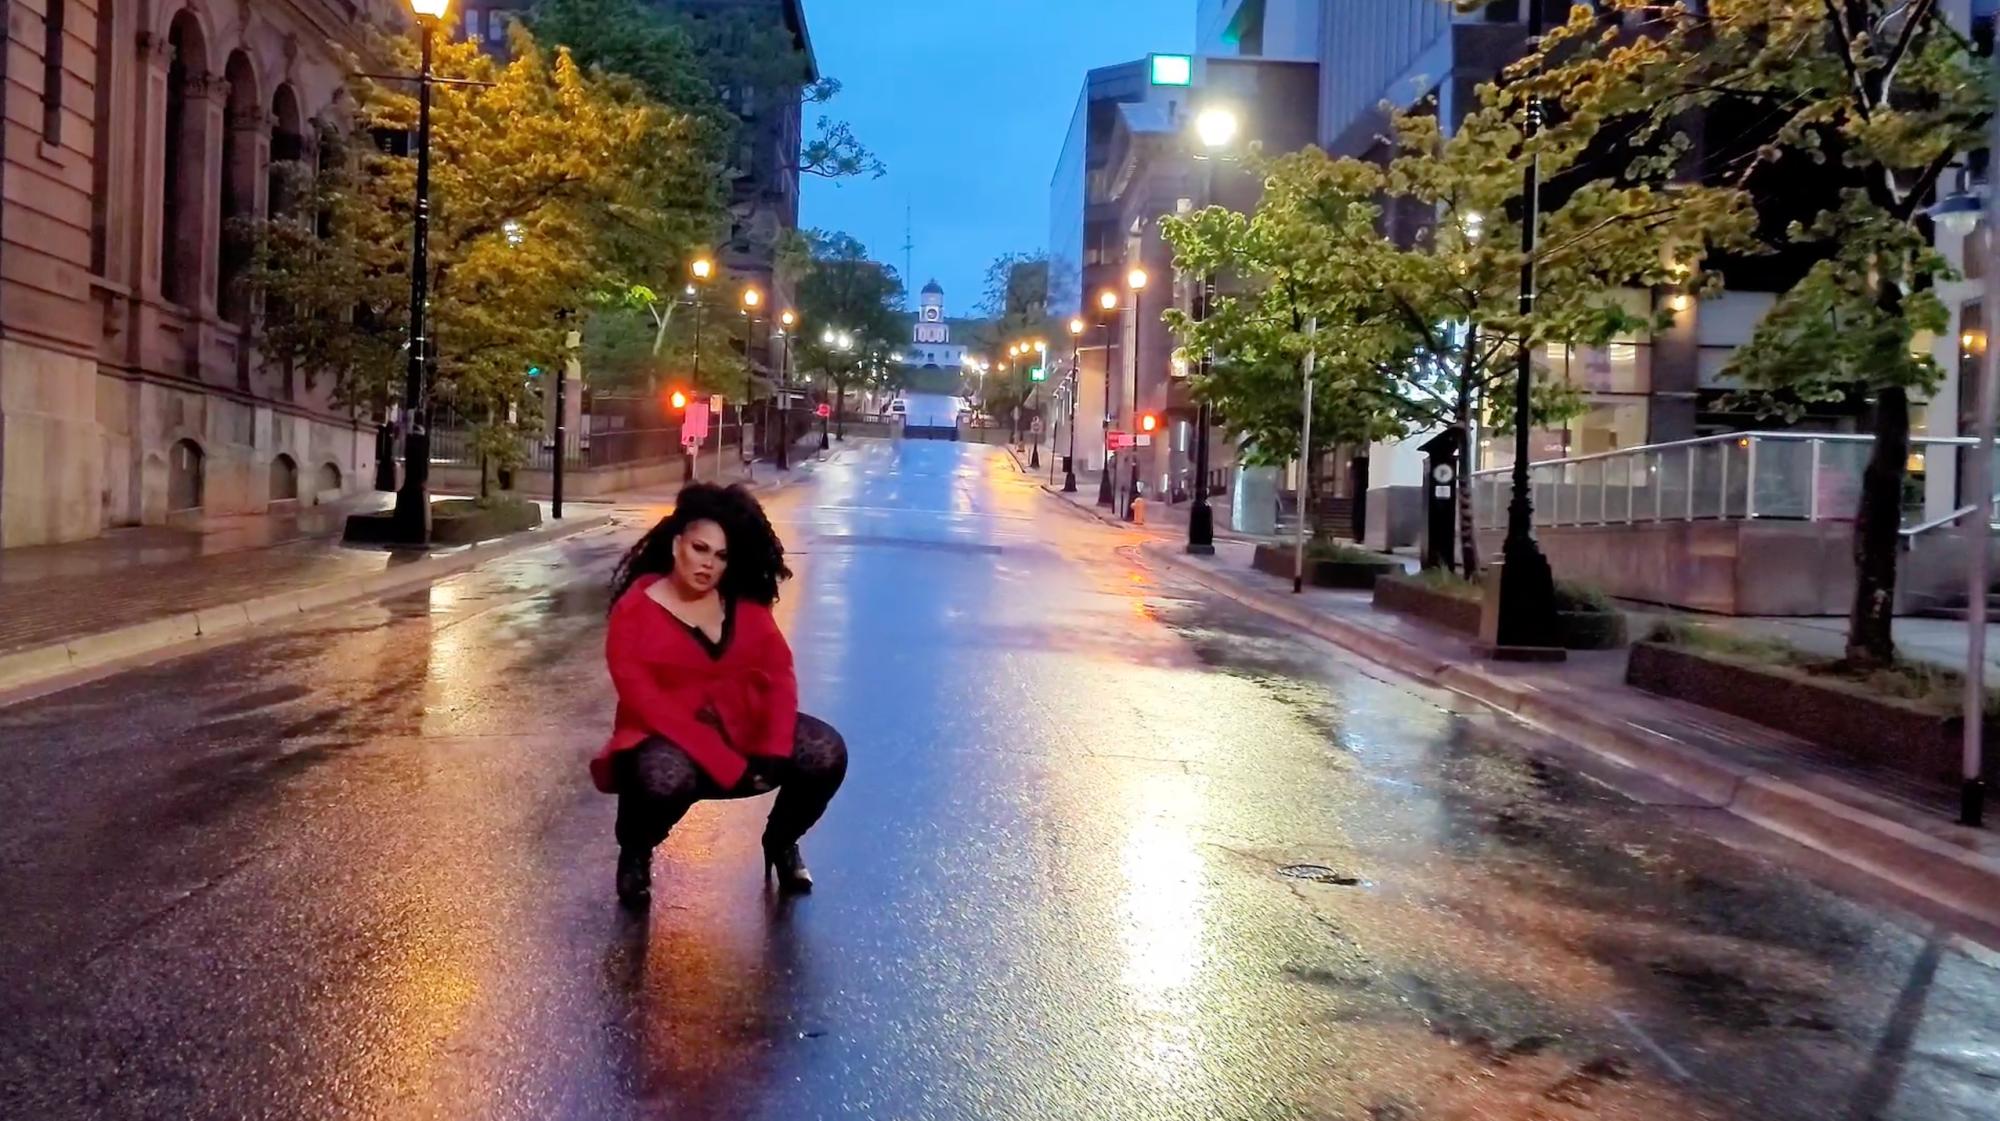 A person wearing black leggings and high heels with a bright red blazer and long black curly hair crouches in the middle of the street, looking at the camera. The sky is a dark blue and the street glistens with rain. The Halifax Citadel Hill clock tower can be seen in the background at the top of the street. 